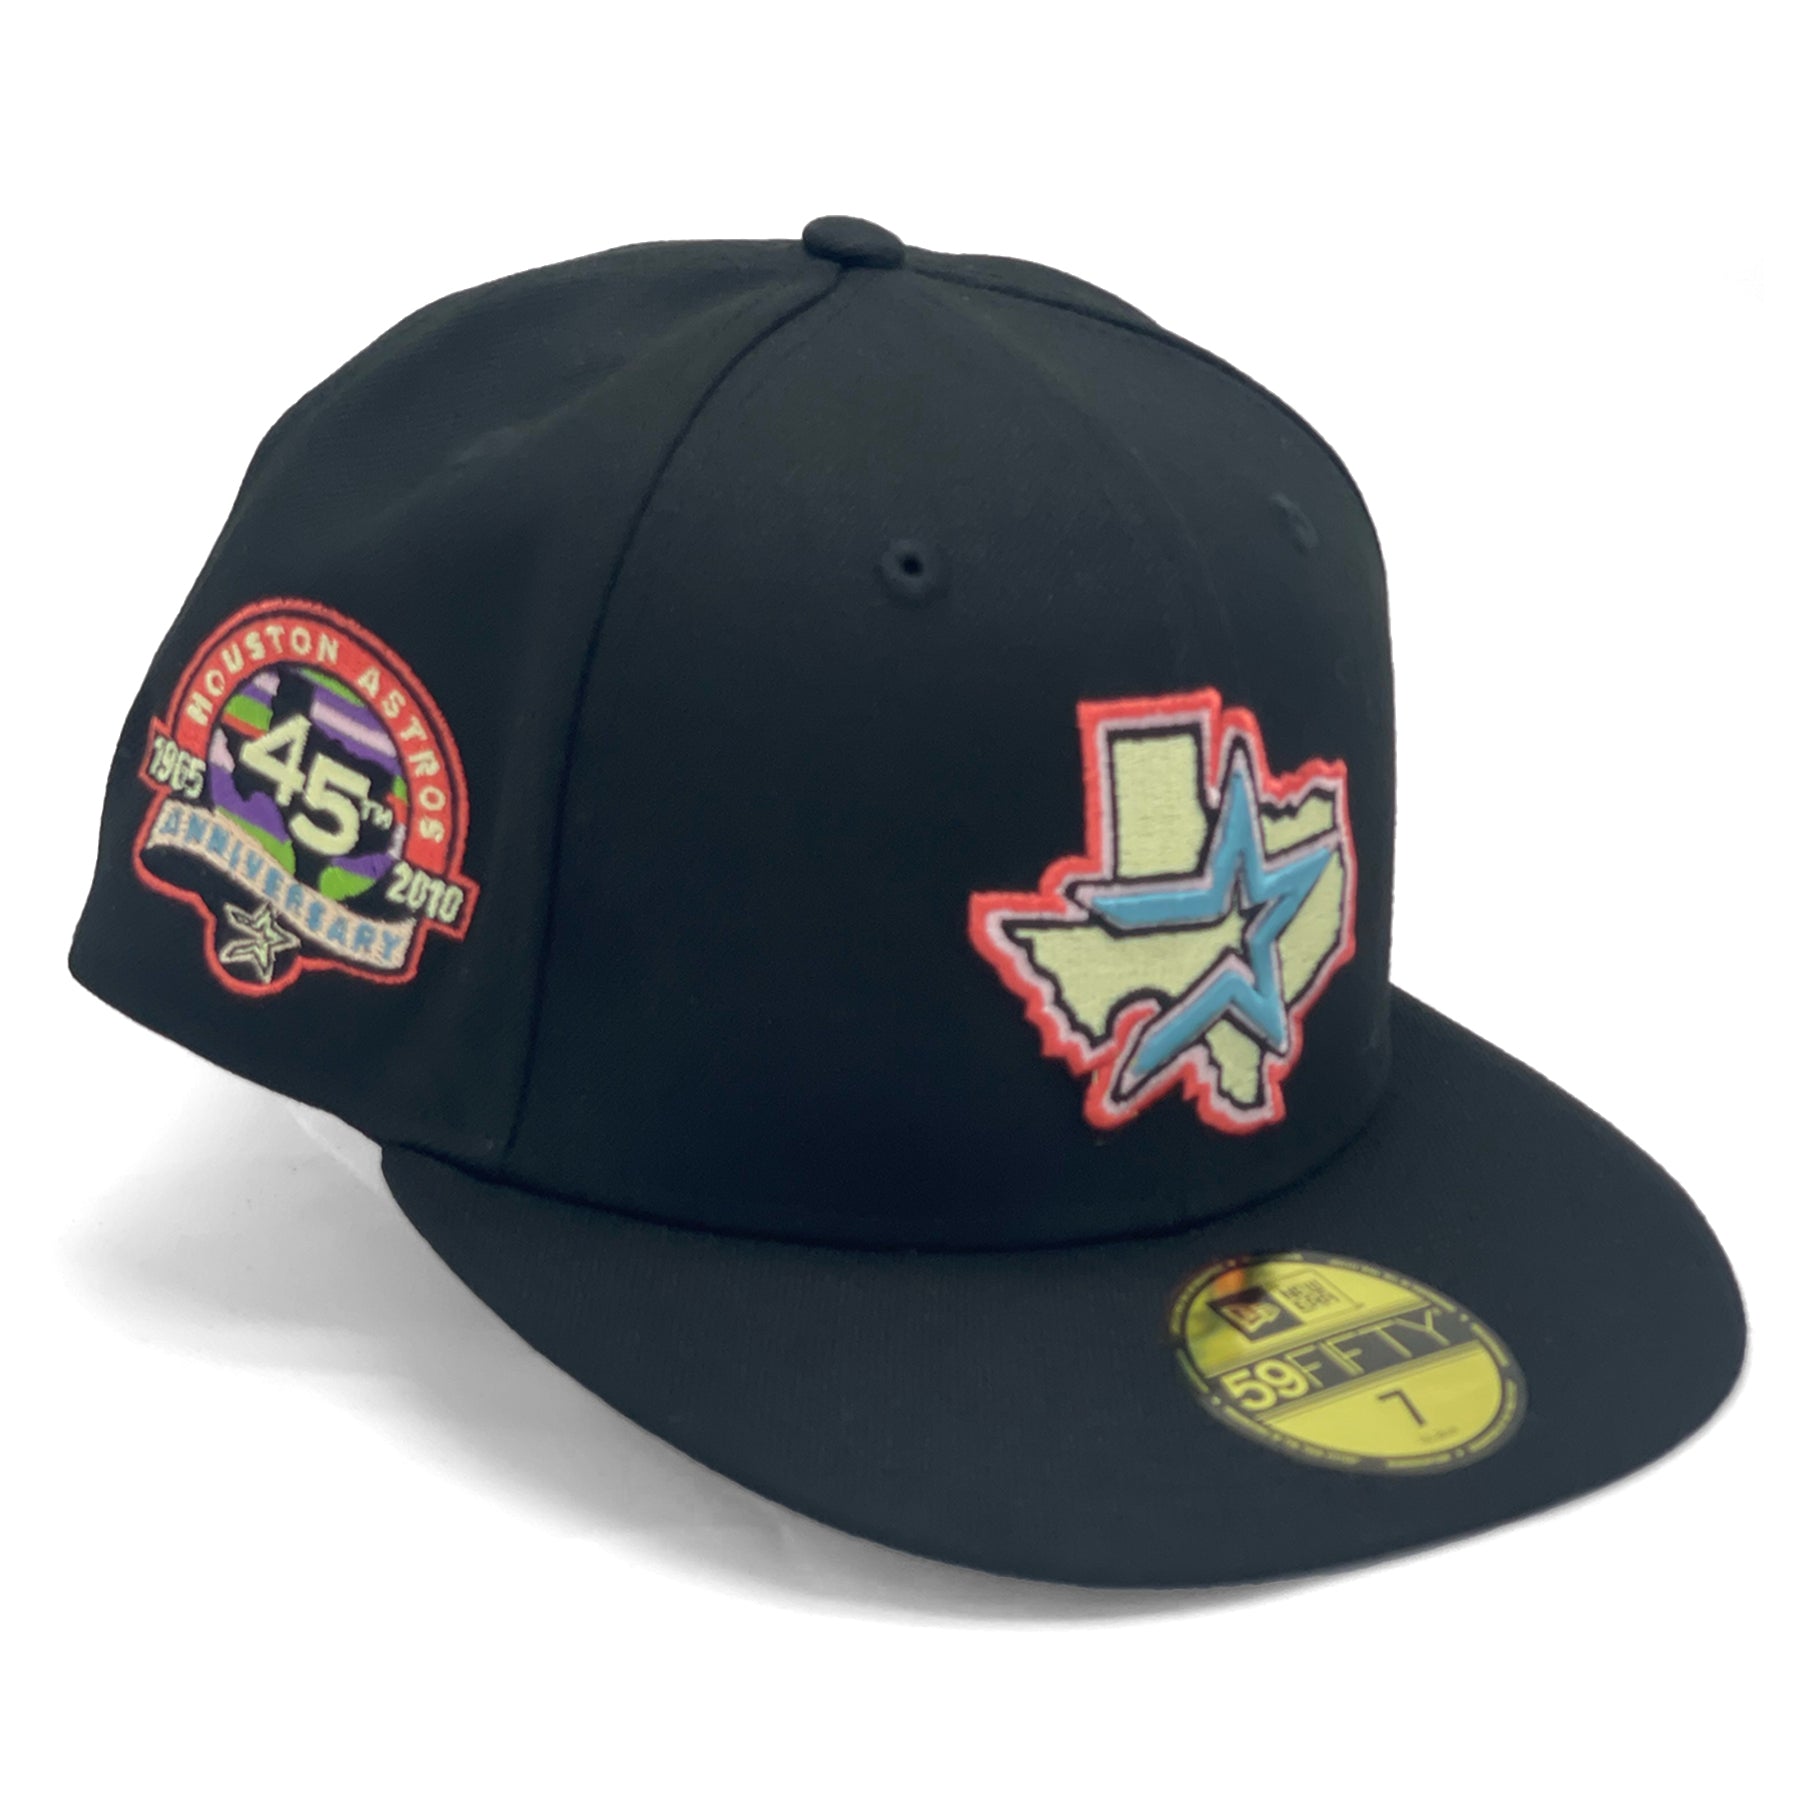 Houston astros 50th anniversary fitted hat. ( 7 3/4 )